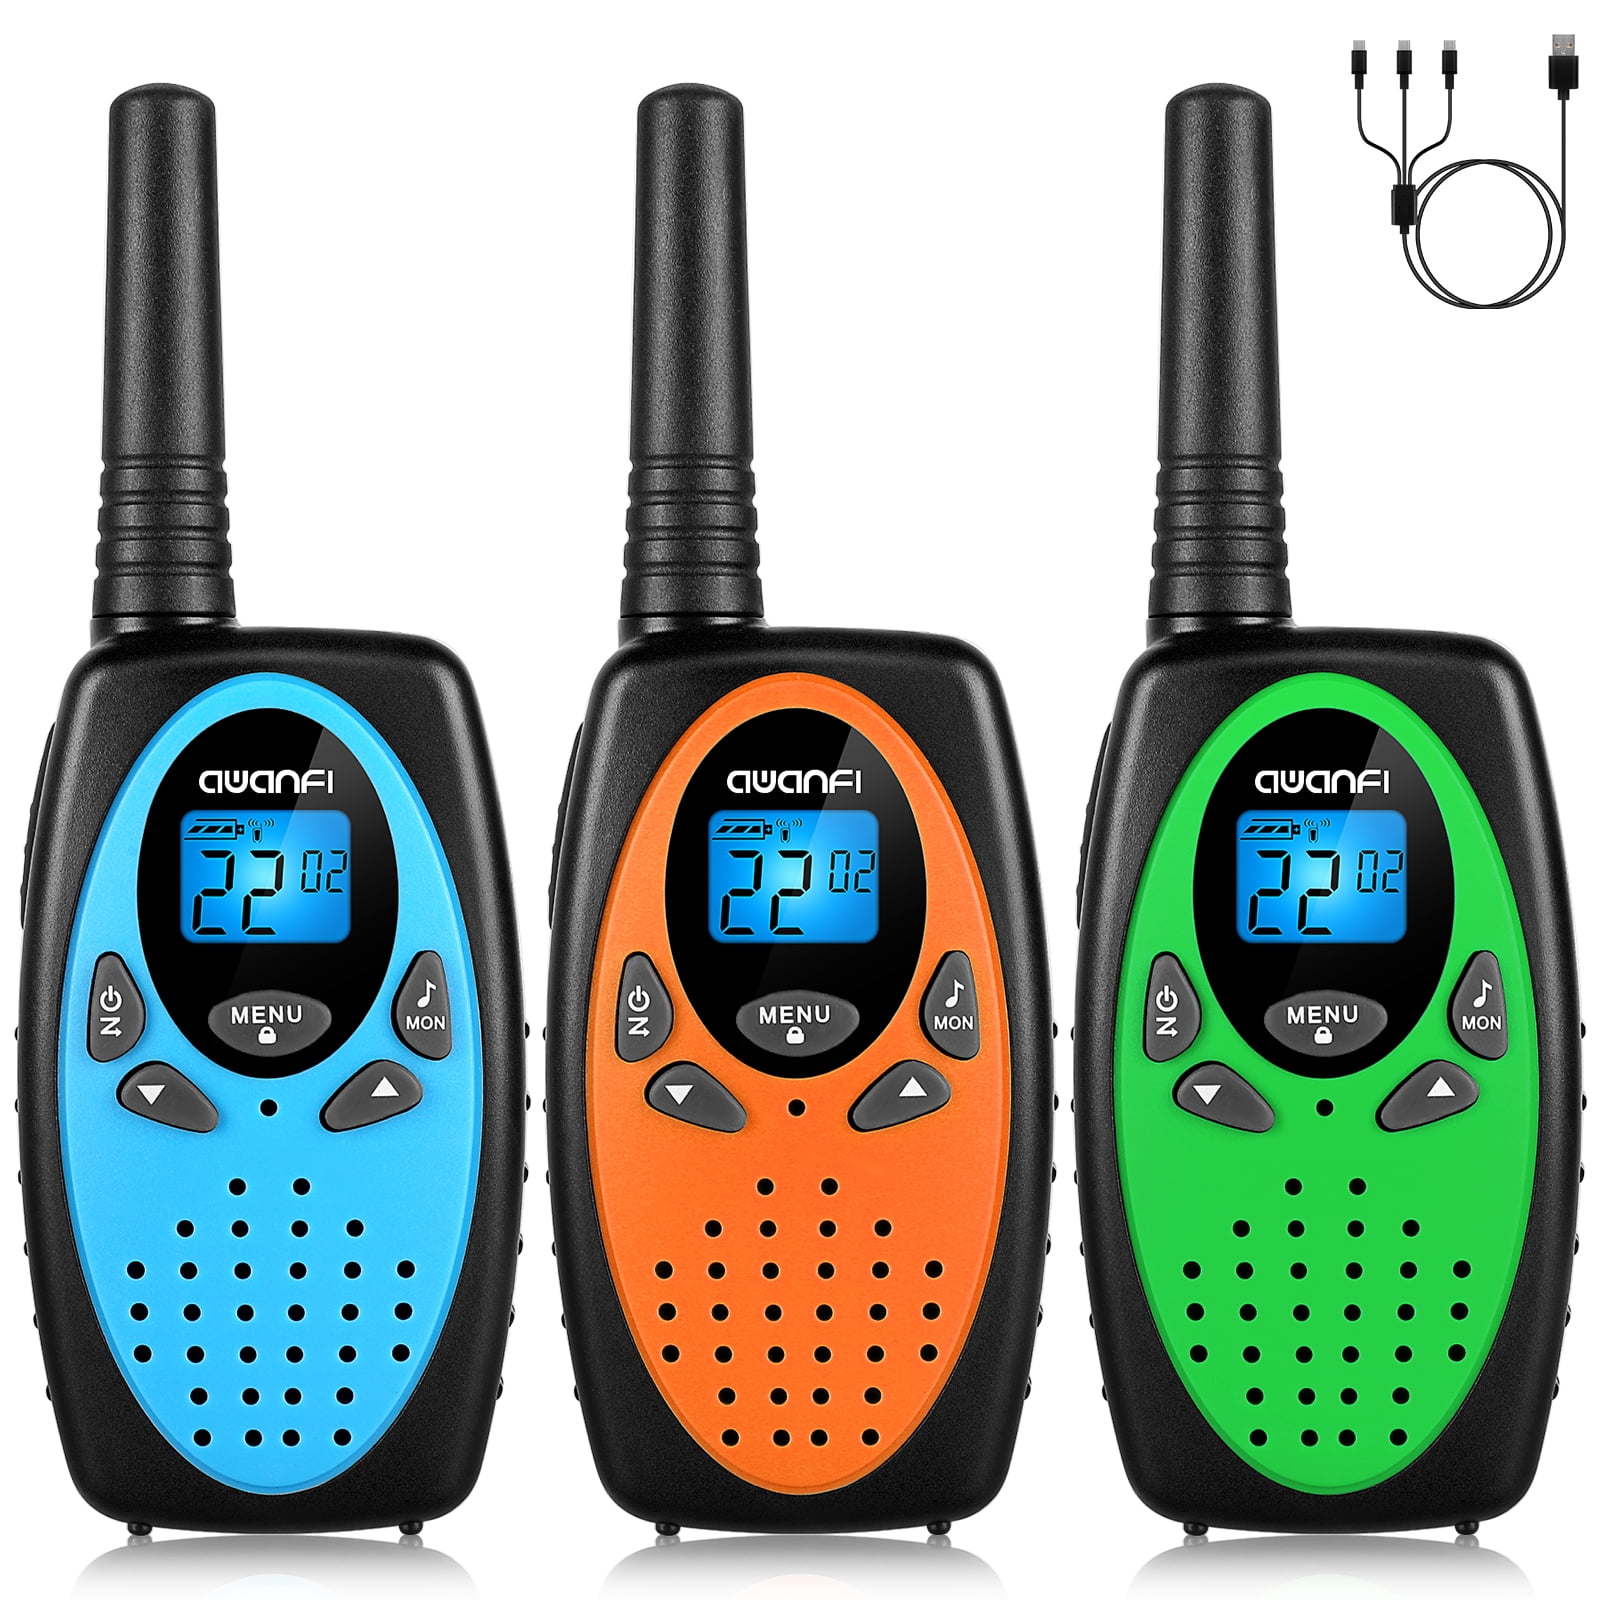 AWANFI Walkie Talkies for Kids Adults, Rechargeable 22 Channels Two Way  Radio Walky Talky Set with 1200mAh Li-ion Battery for Boys Girls Gift(2 Pack) 